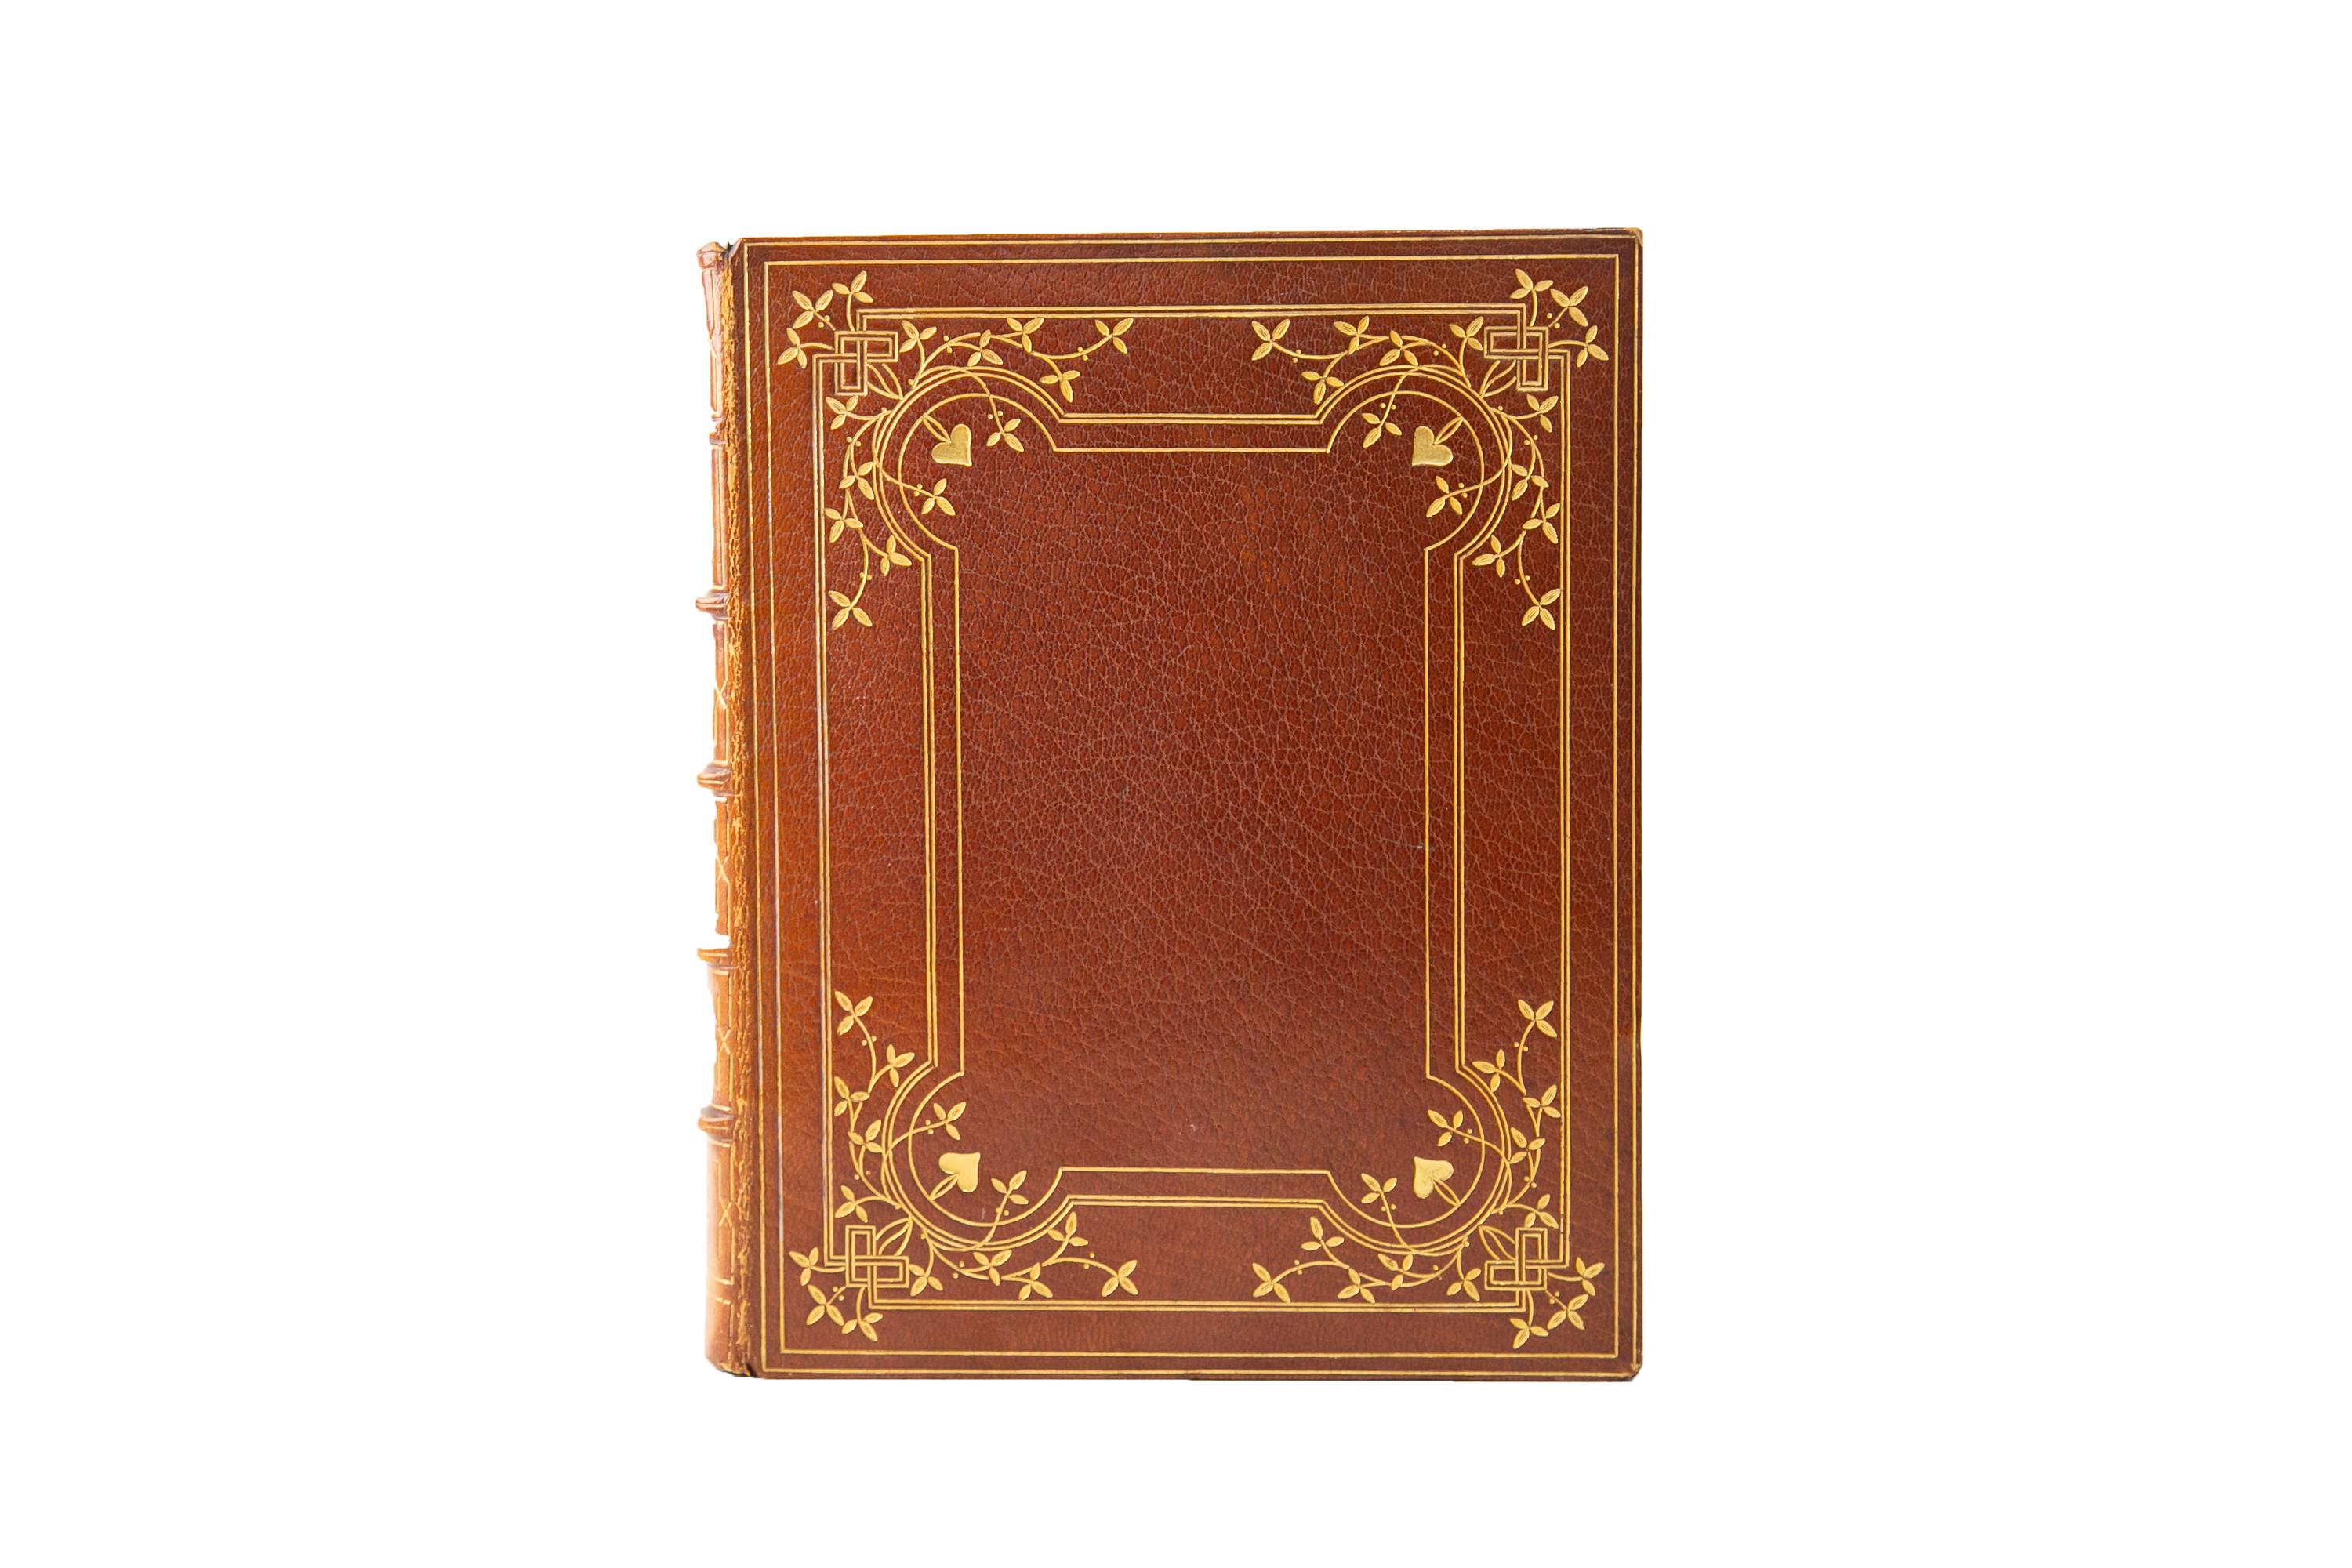 1 Volume. Francis Bacon, The Essays. Bound by Morrell in full brown morocco with the covers displaying floral and ruled gilt-tooled borders. The spines display raised bands, bordering, floral details, and label lettering, all gilt-tooled. The top